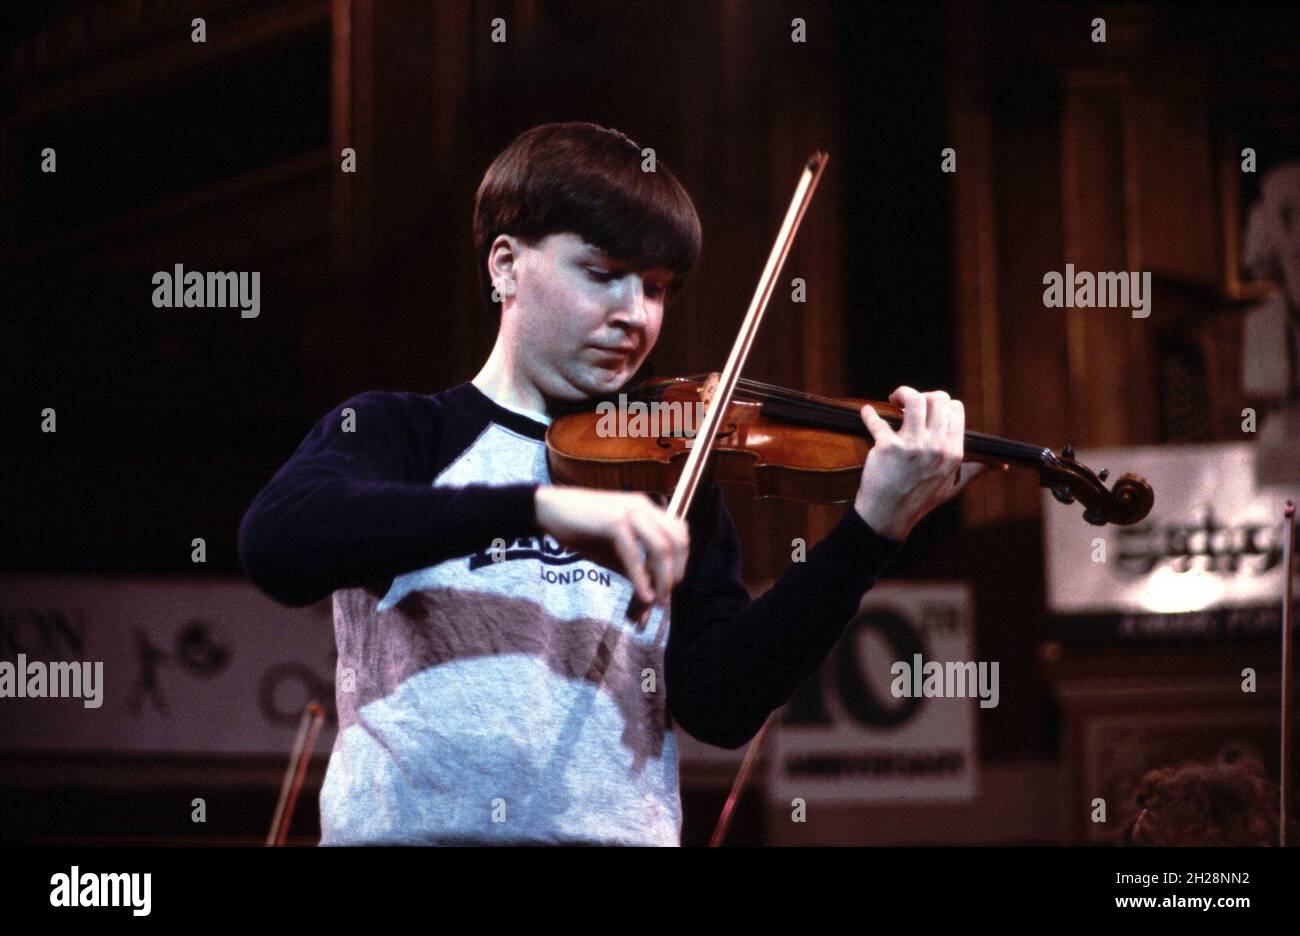 English violinist and violist Nigel Kennedy, aged 28, in rehearsal for